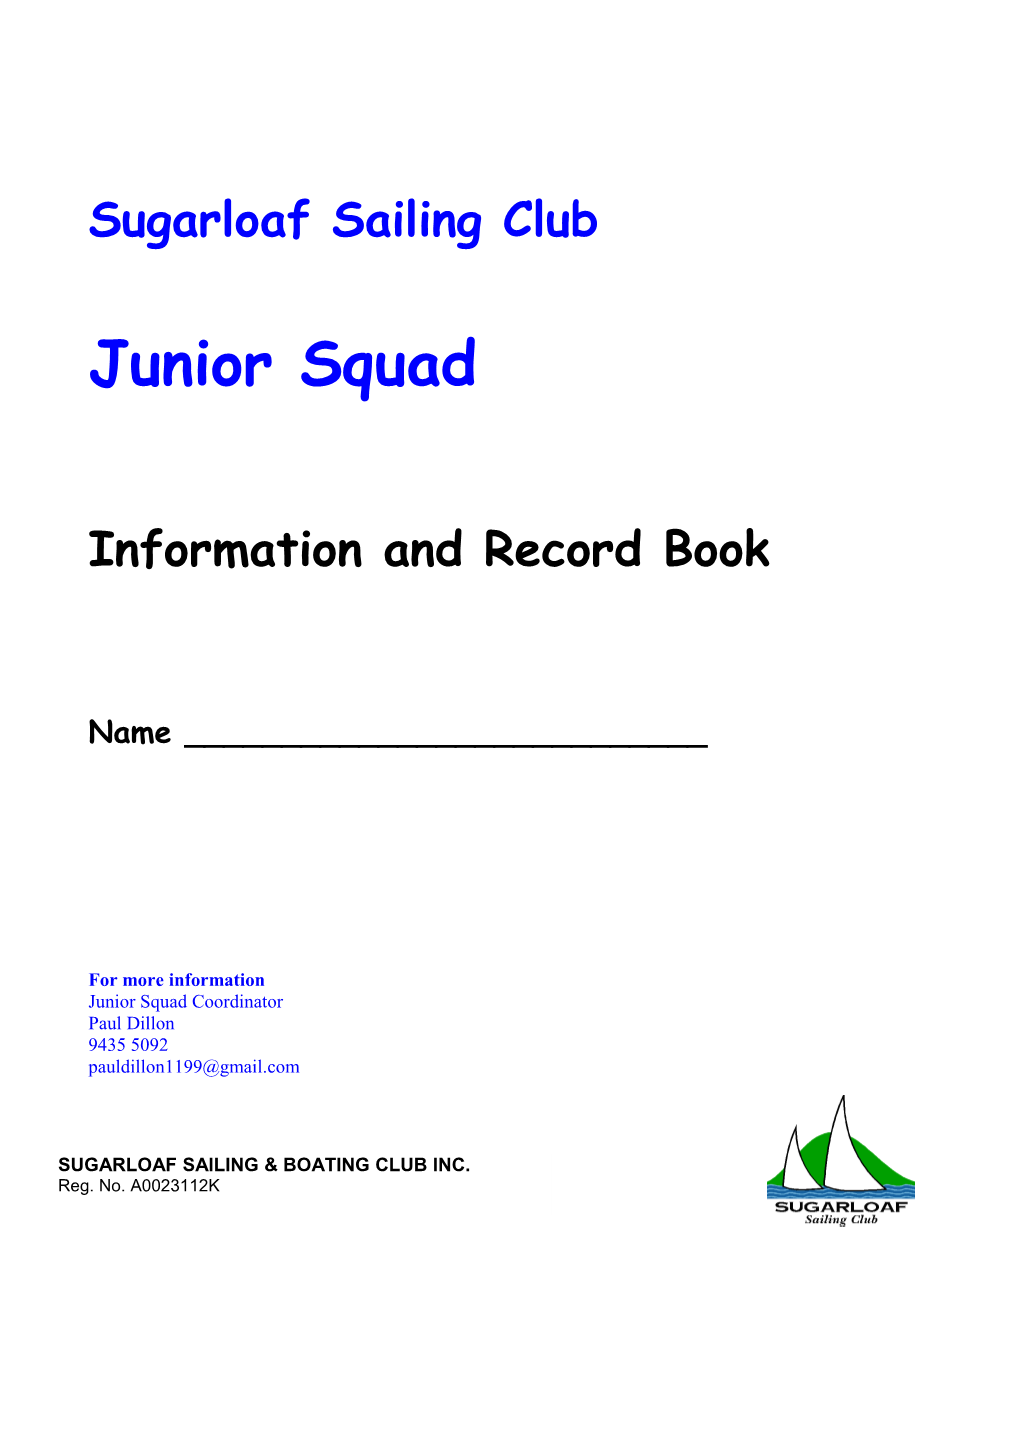 The Sugarloaf Junior Squad Will Be Held Every Saturday from 0900 to 1200, Starting on The